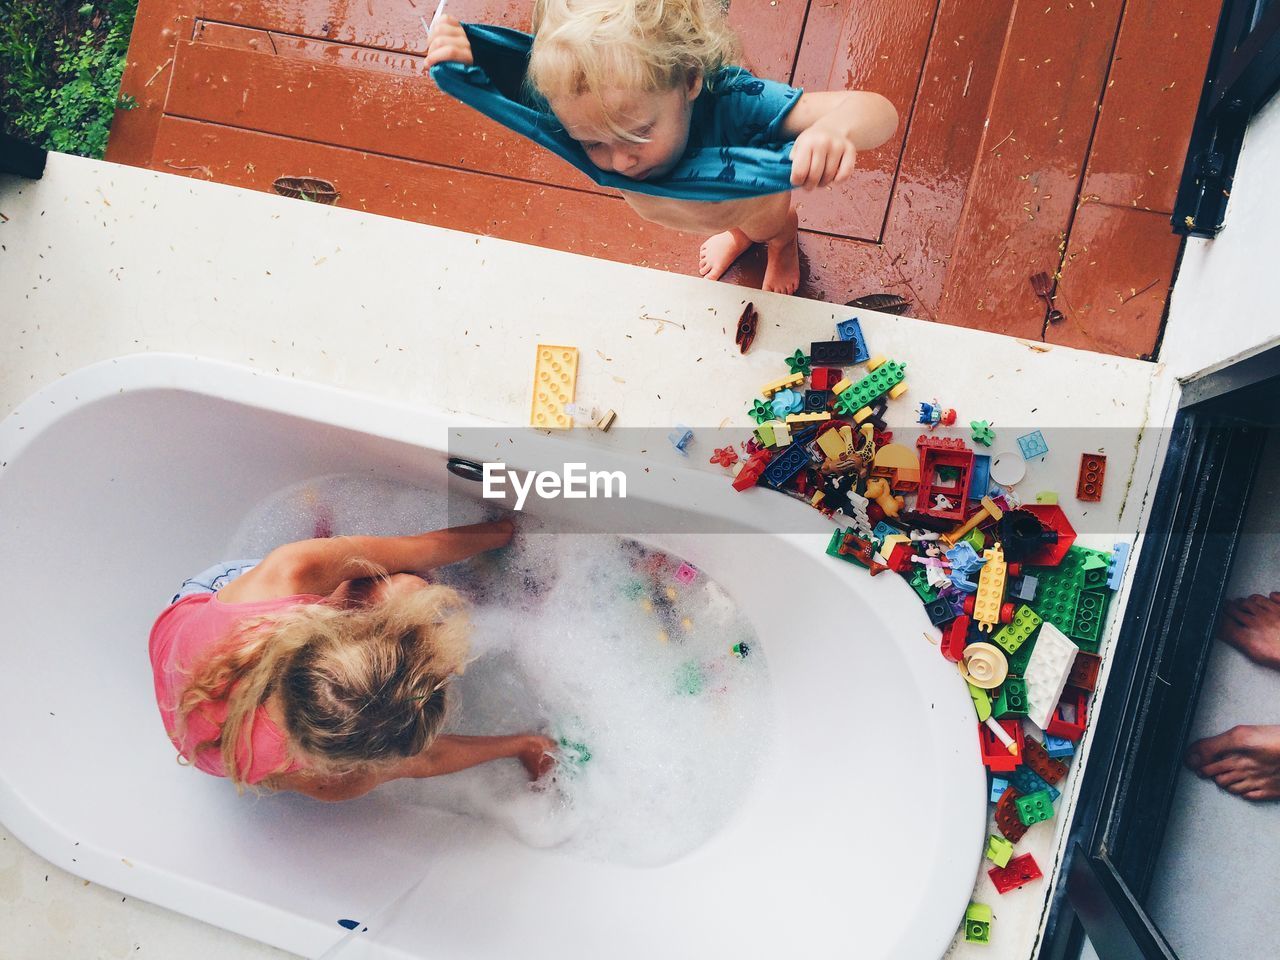 childhood, real people, child, bathtub, leisure activity, high angle view, lifestyles, people, domestic bathroom, indoors, water, domestic room, bathroom, directly above, women, boys, home, men, messy, innocence